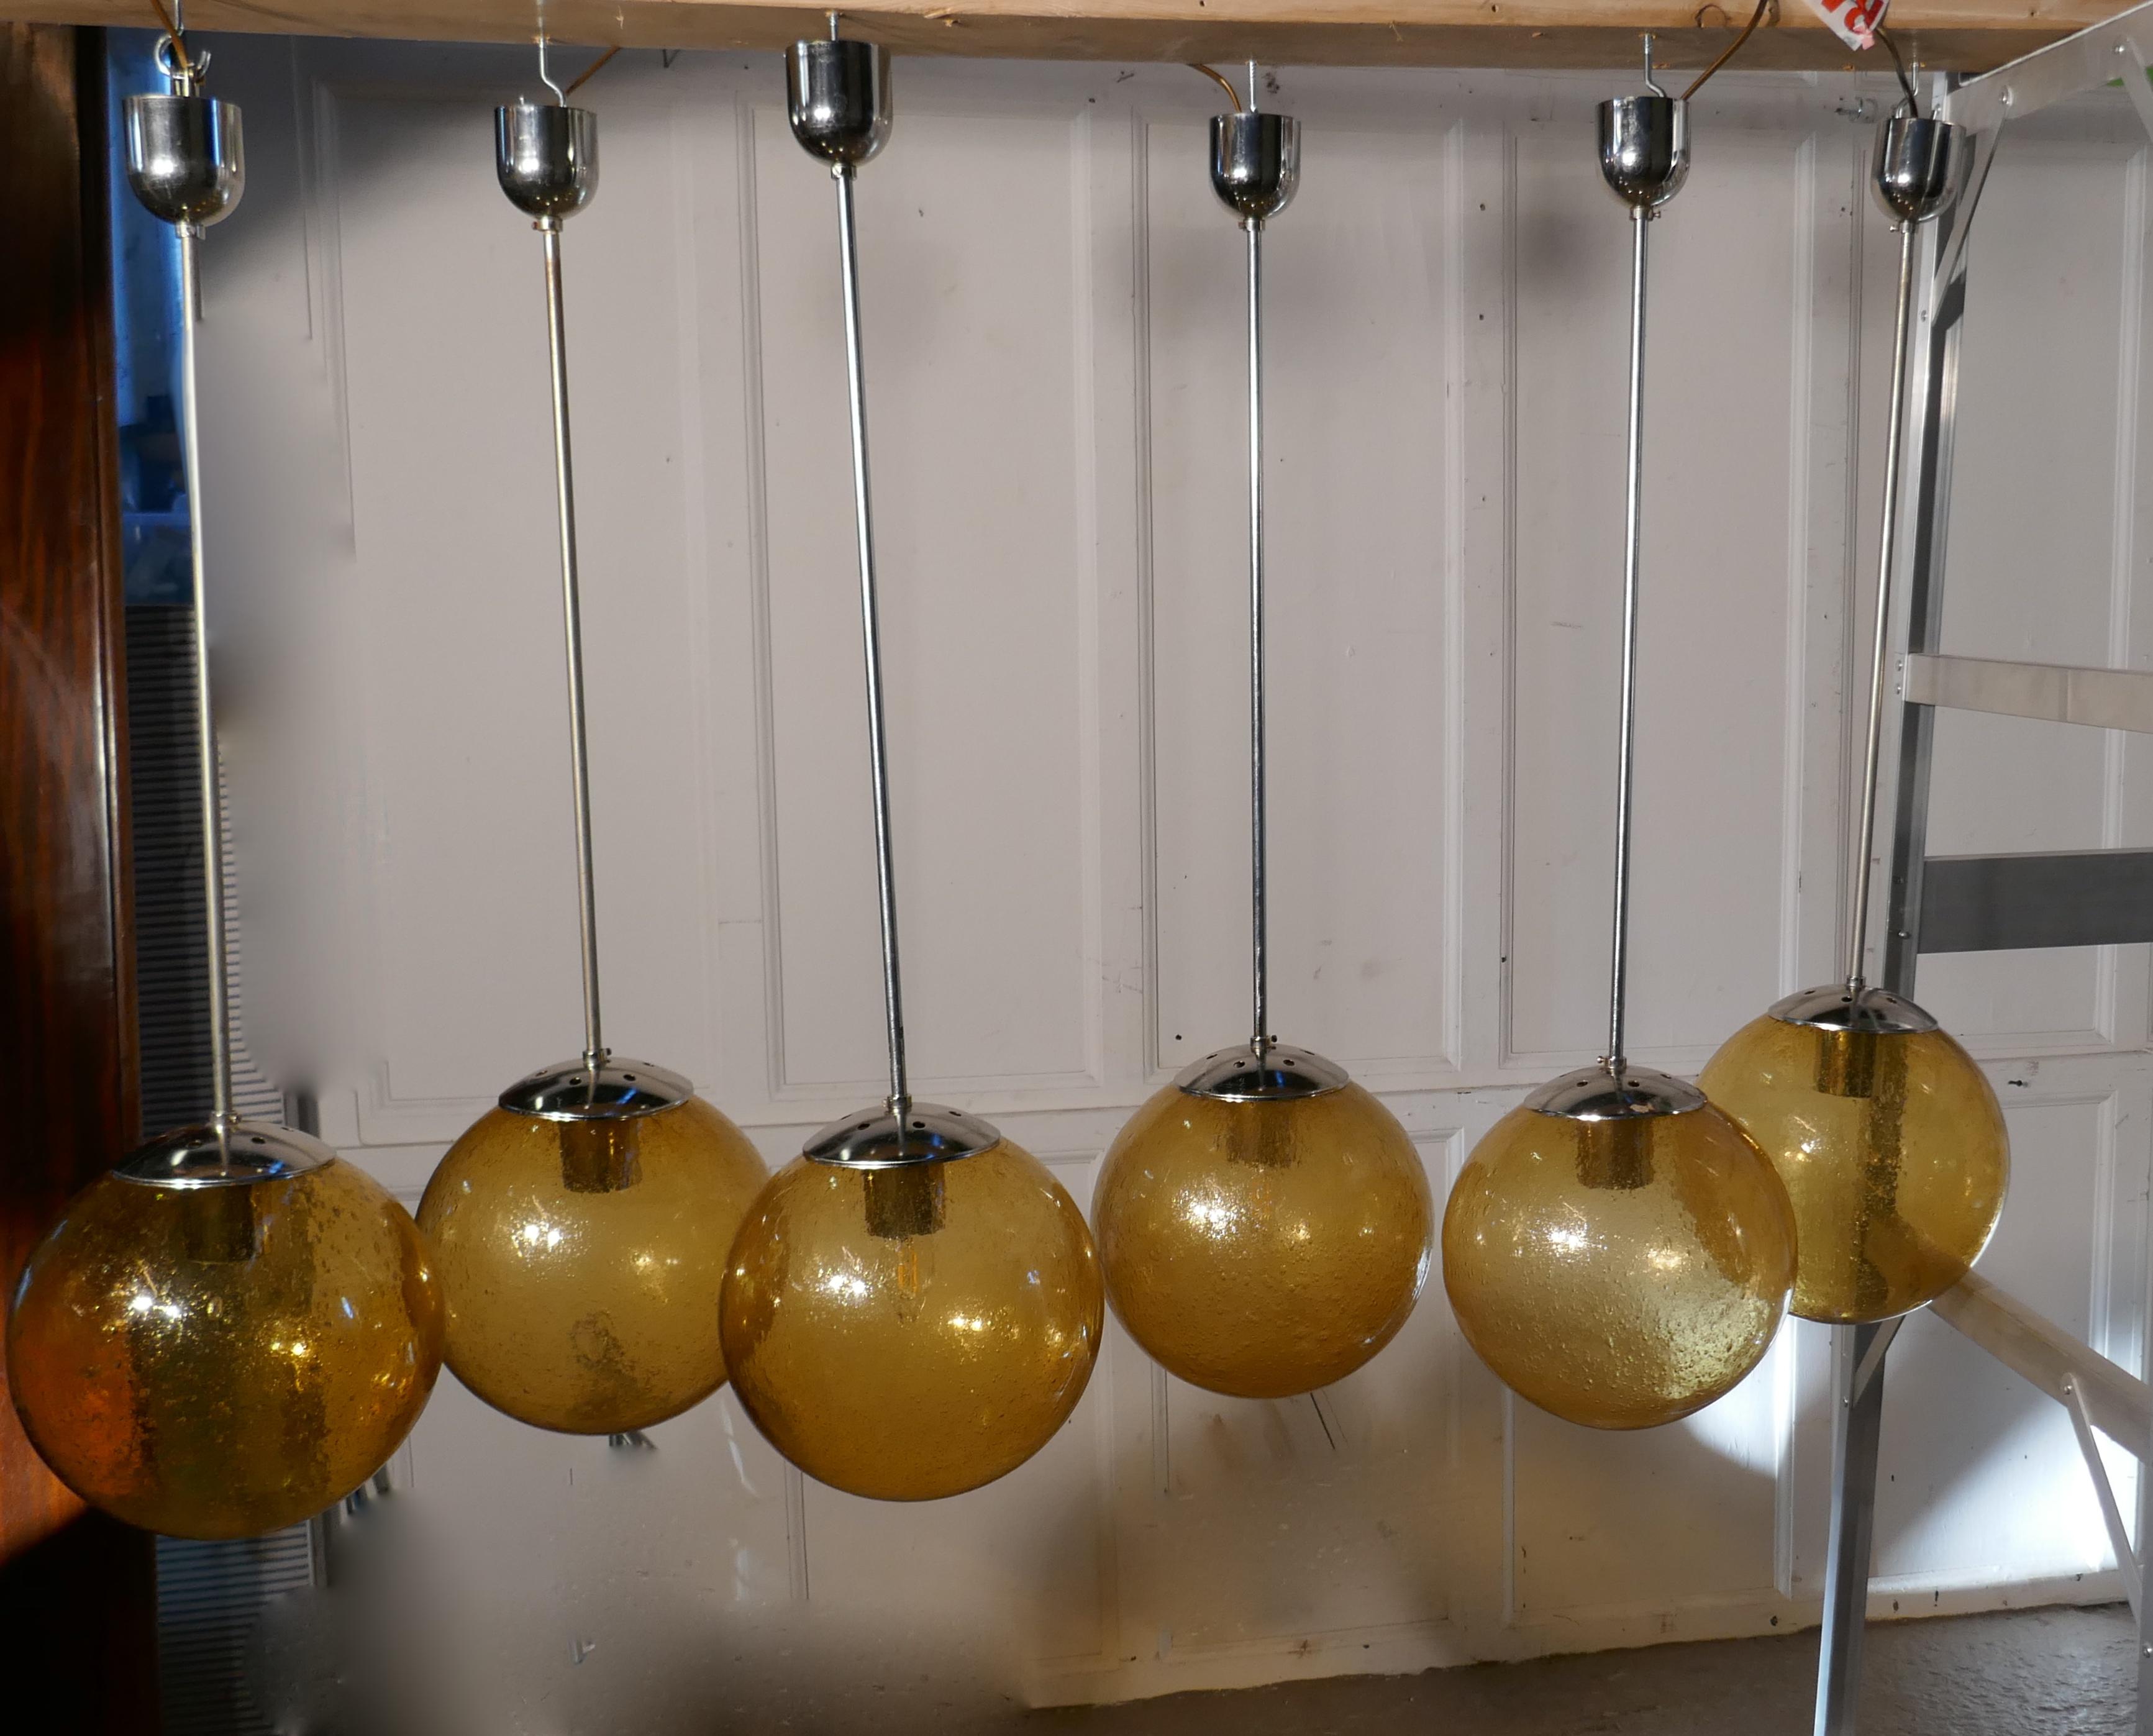 Set of 6 large retro amber globe and chrome lights.

I rare find, these lights have been used but they are in close to original condition, the original amber glass raindrop globe shades even have their original cardboard cartons
The globes are